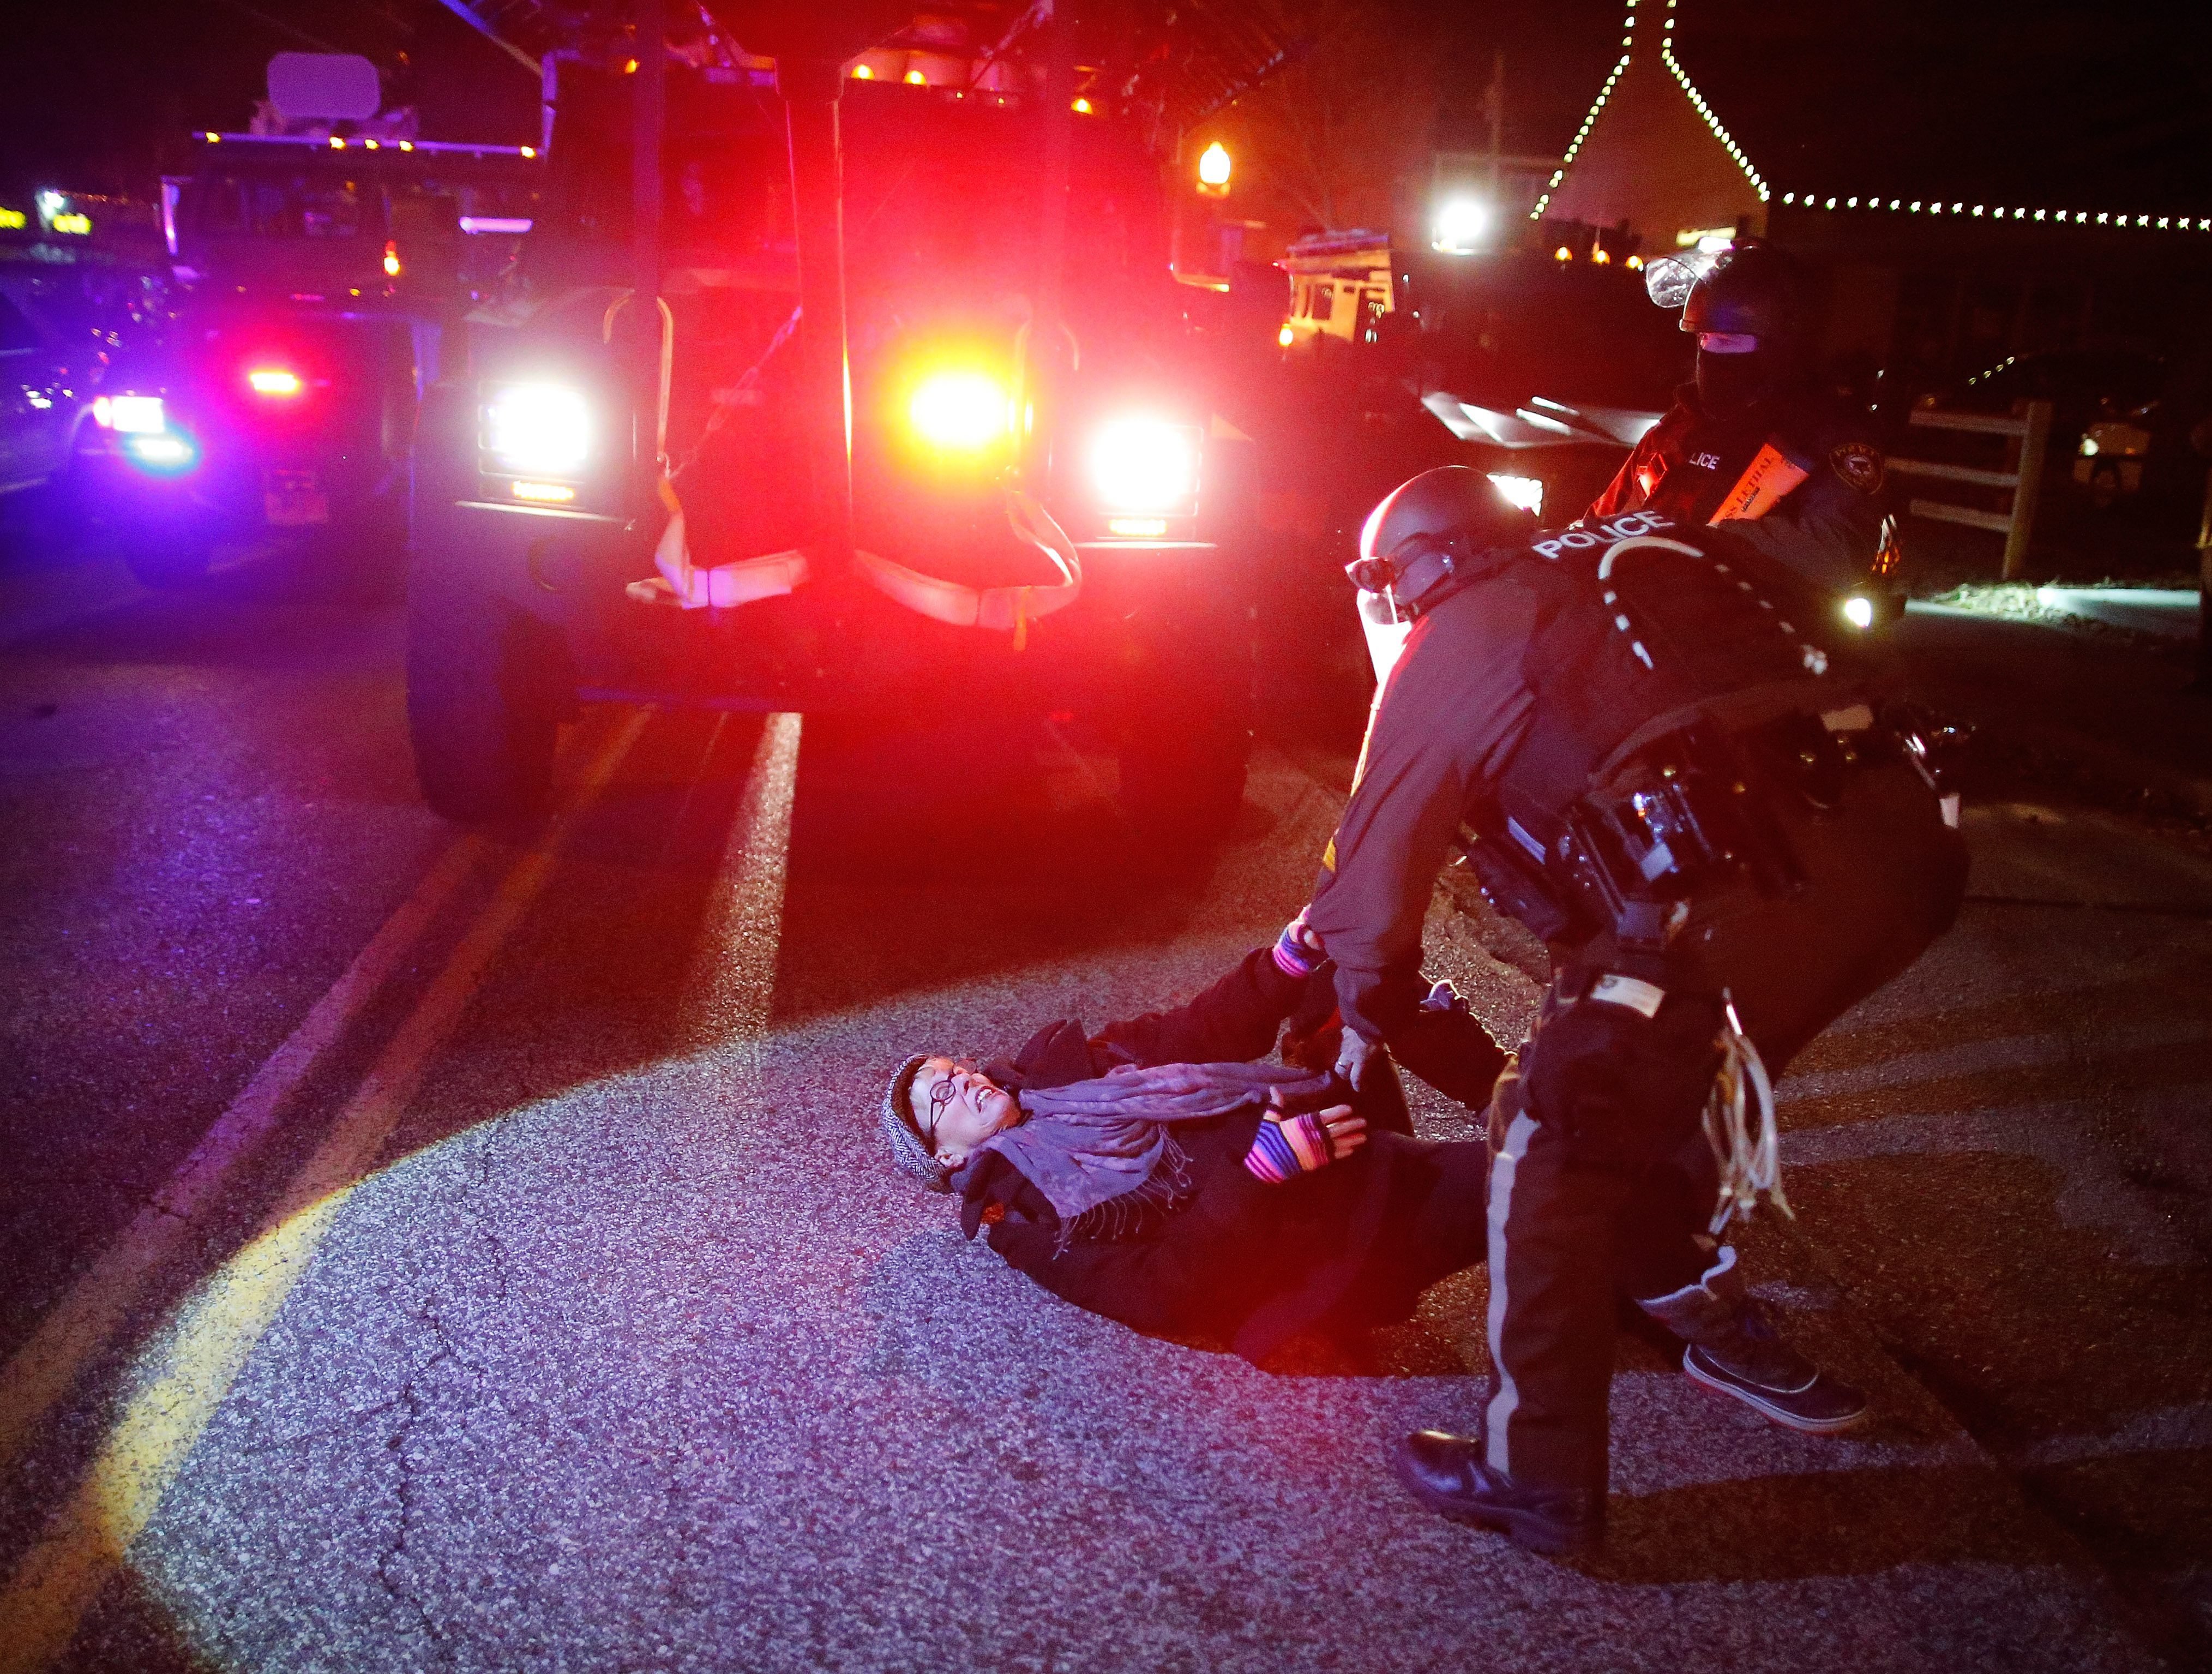 Police in riot gear tangle with a woman in front of emergency vehicles in Ferguson Mo. on Nov. 24, 2014.